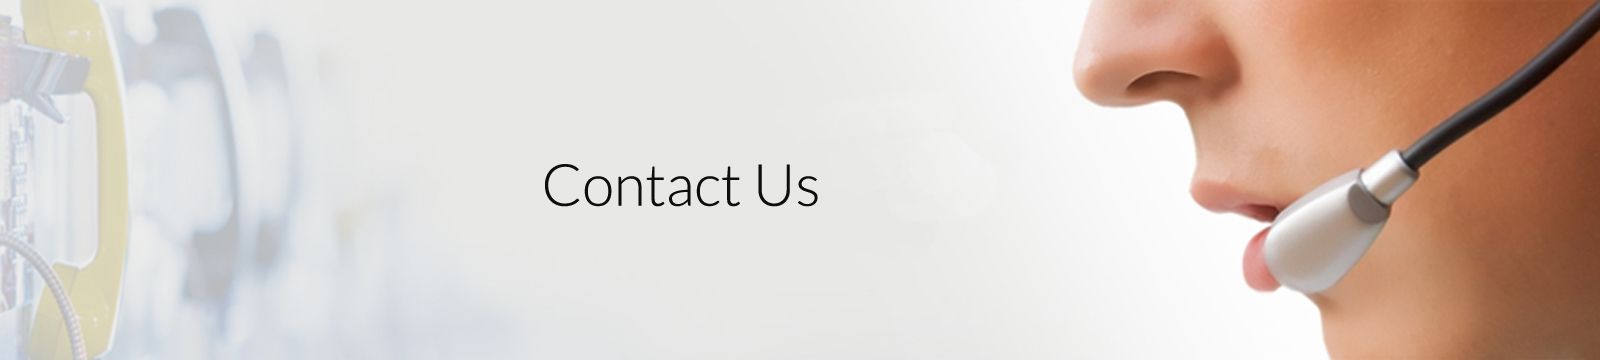 Contact-Us-Banner